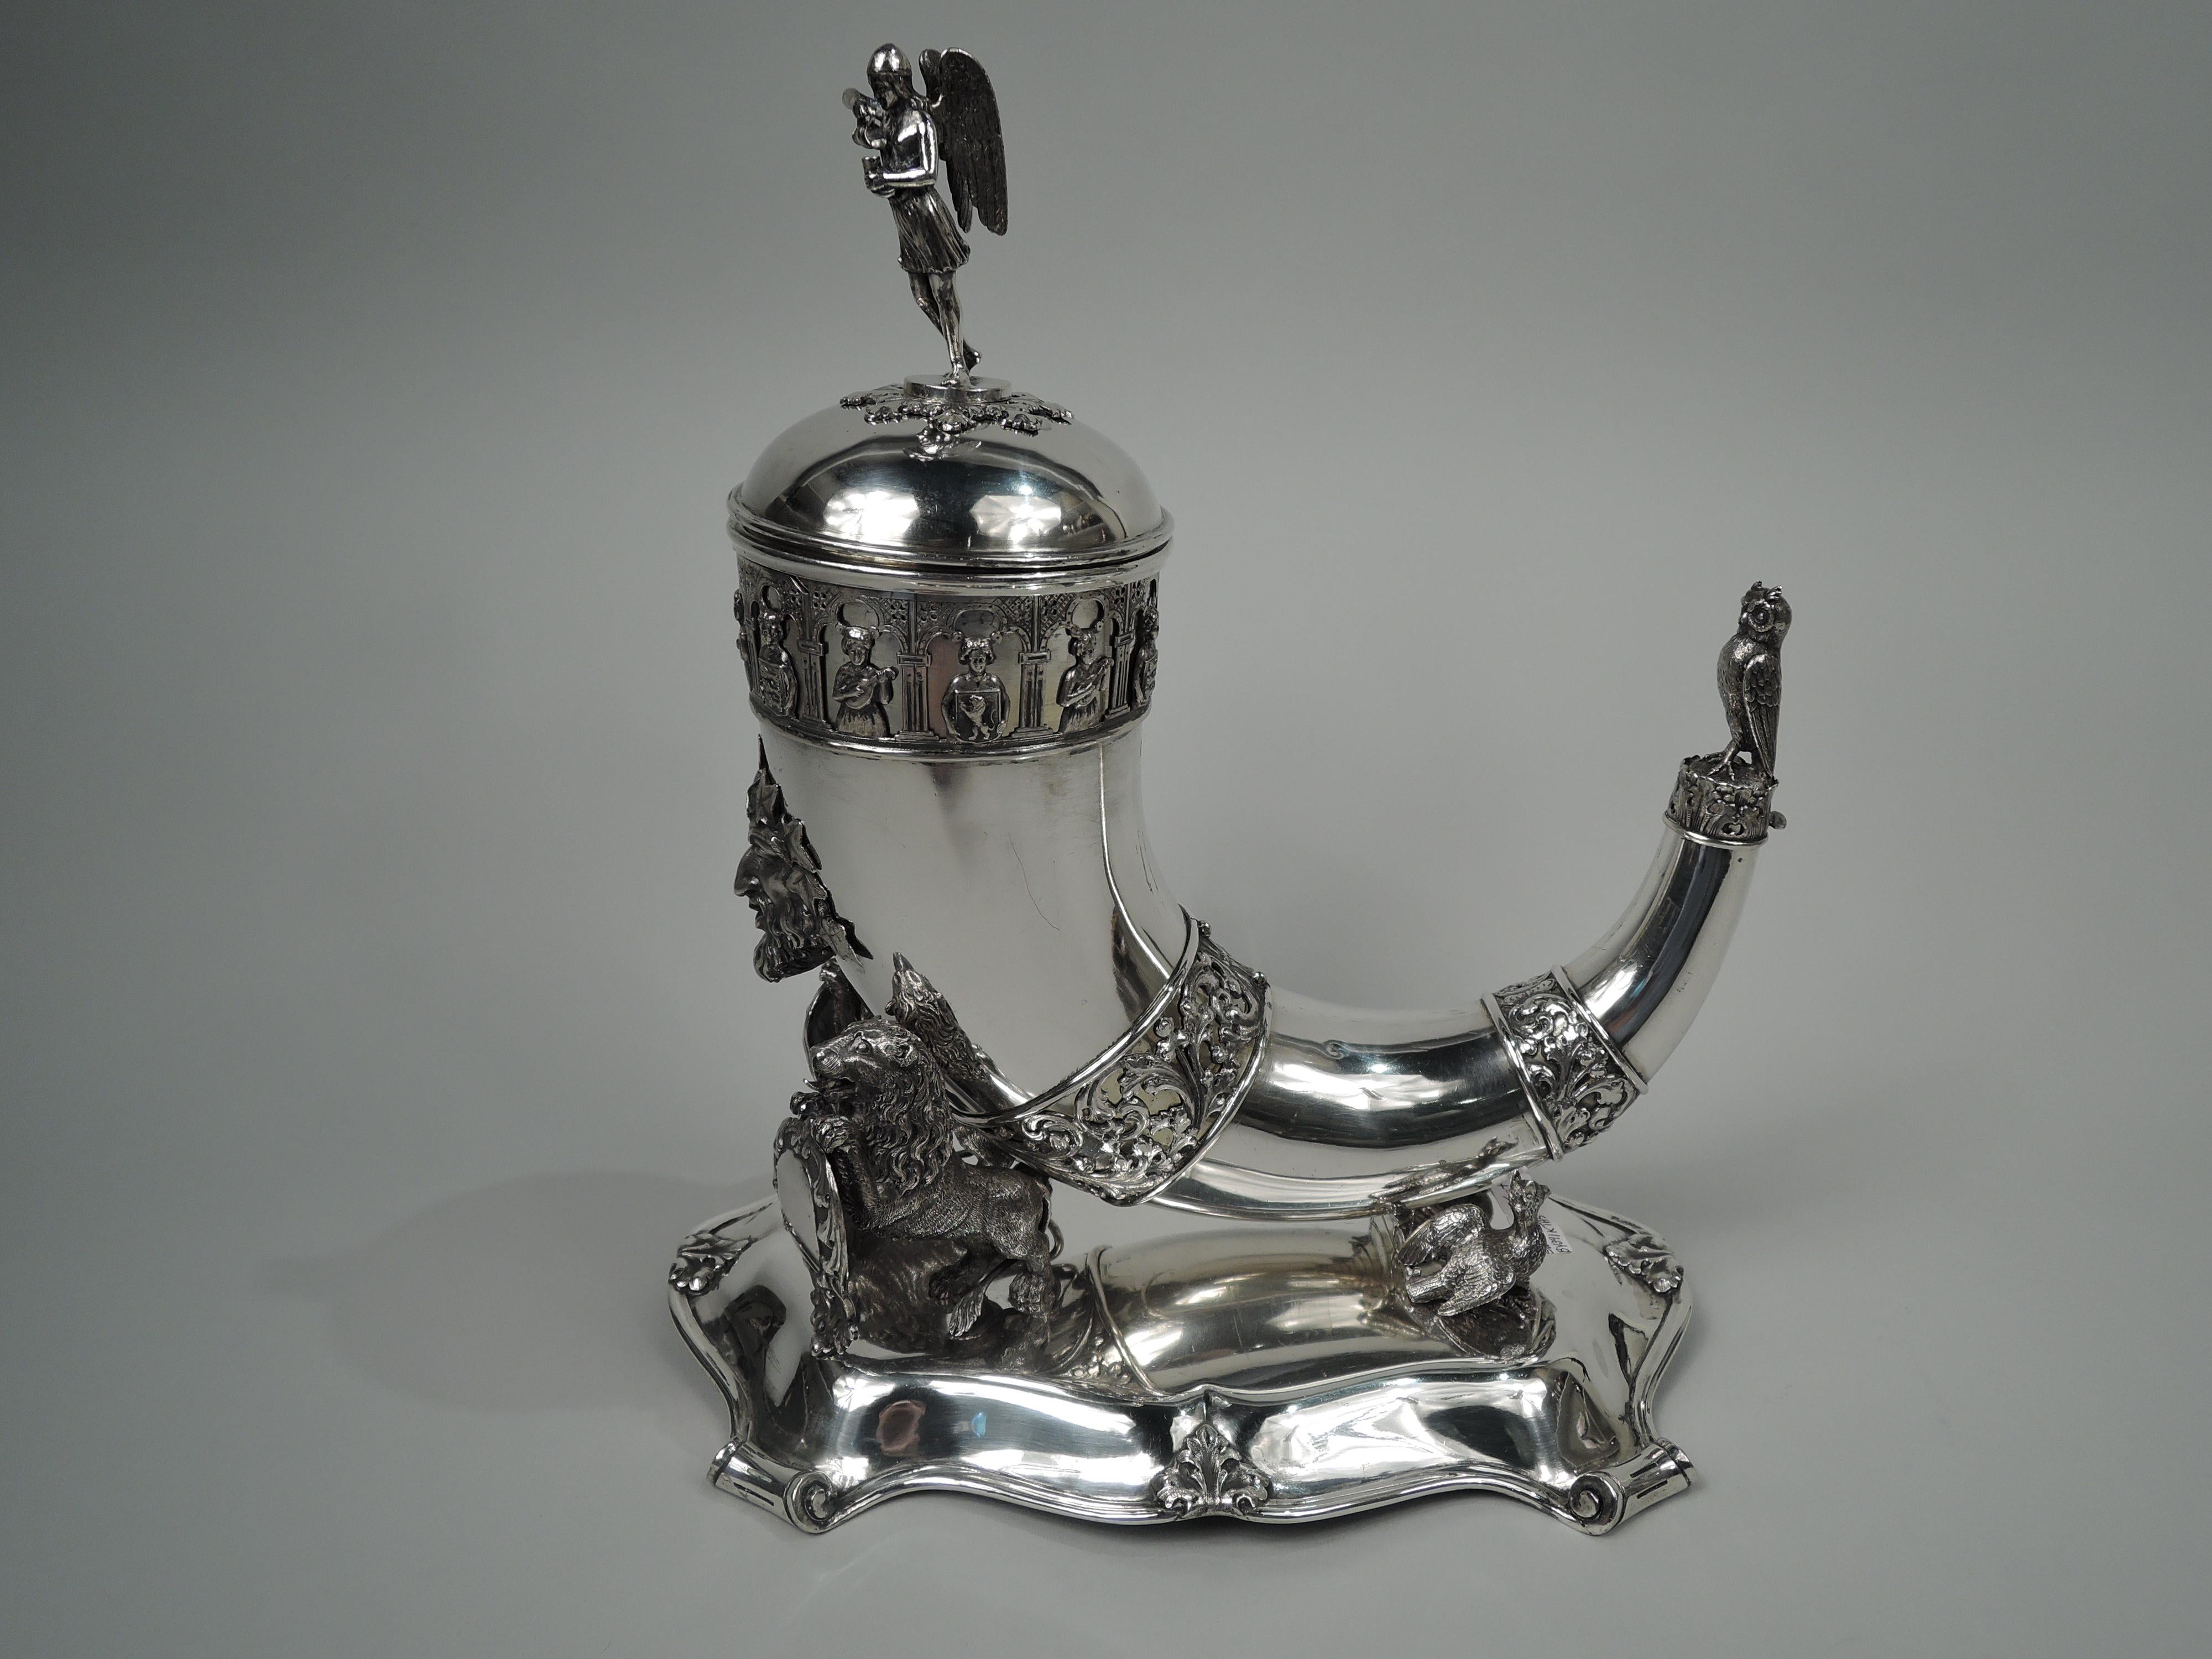 Danish Biedermeier Gothic Troubadour silver horn on stand, 1855. Horn has two applied bands with leafing scrollwork and cast green man applied to front. At top a third band with mandolin-strumming maidens and coat of arms-bearing pages in cloister